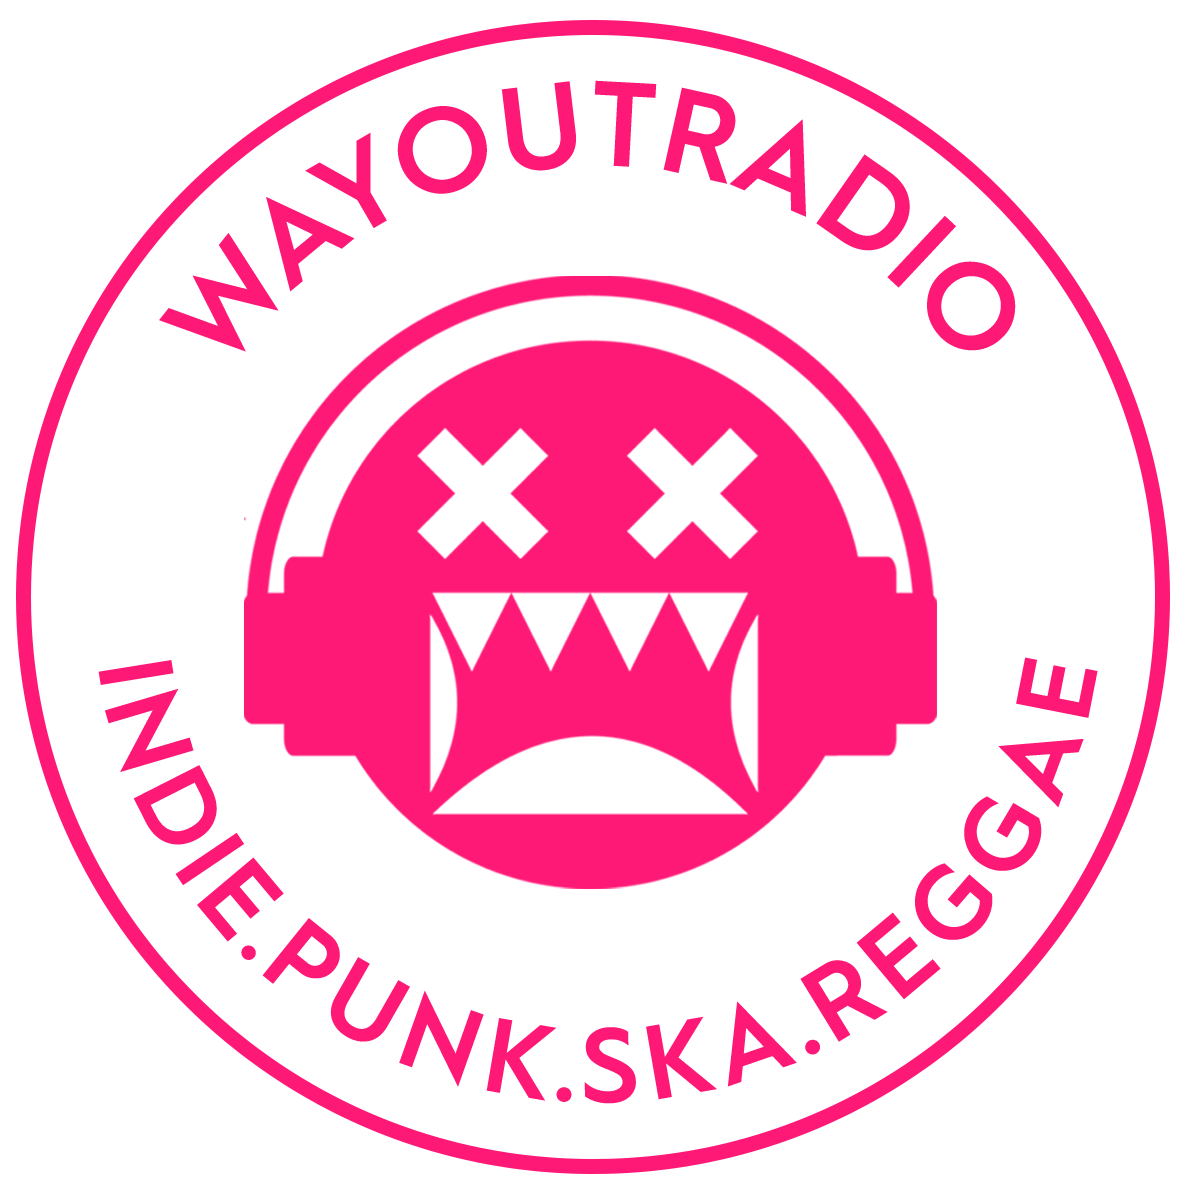 WAY OUT RADIO